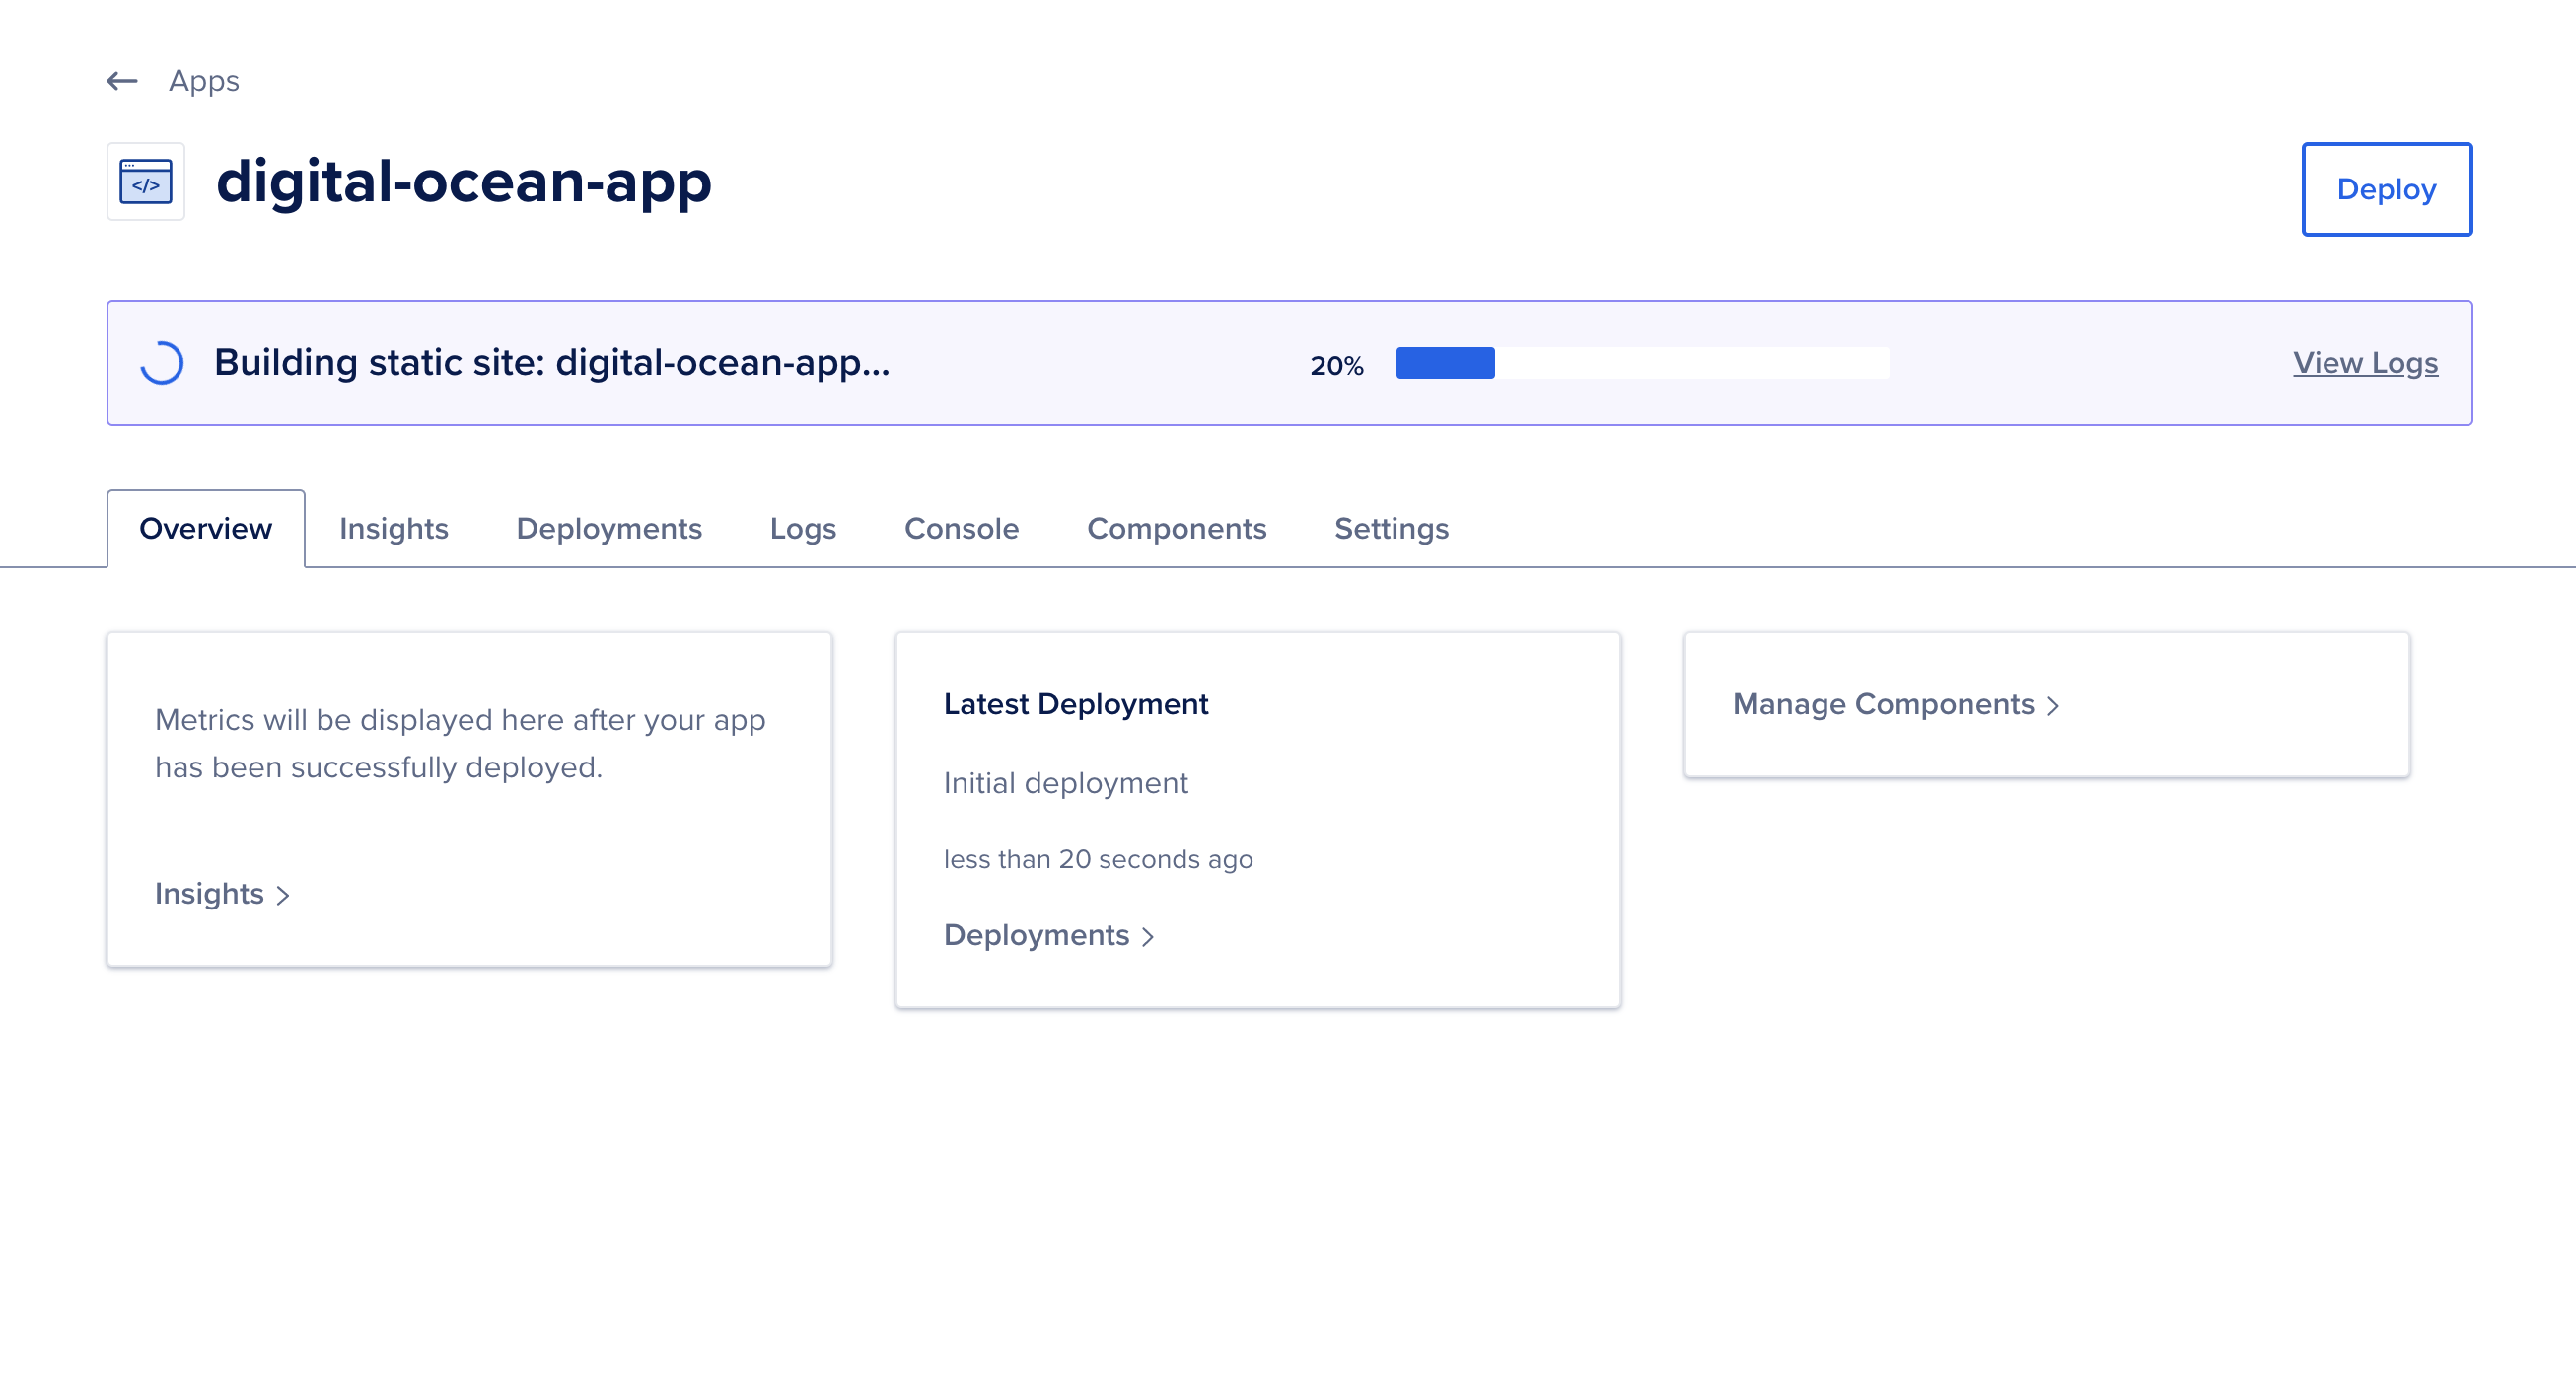 DigitalOcean is building the application page